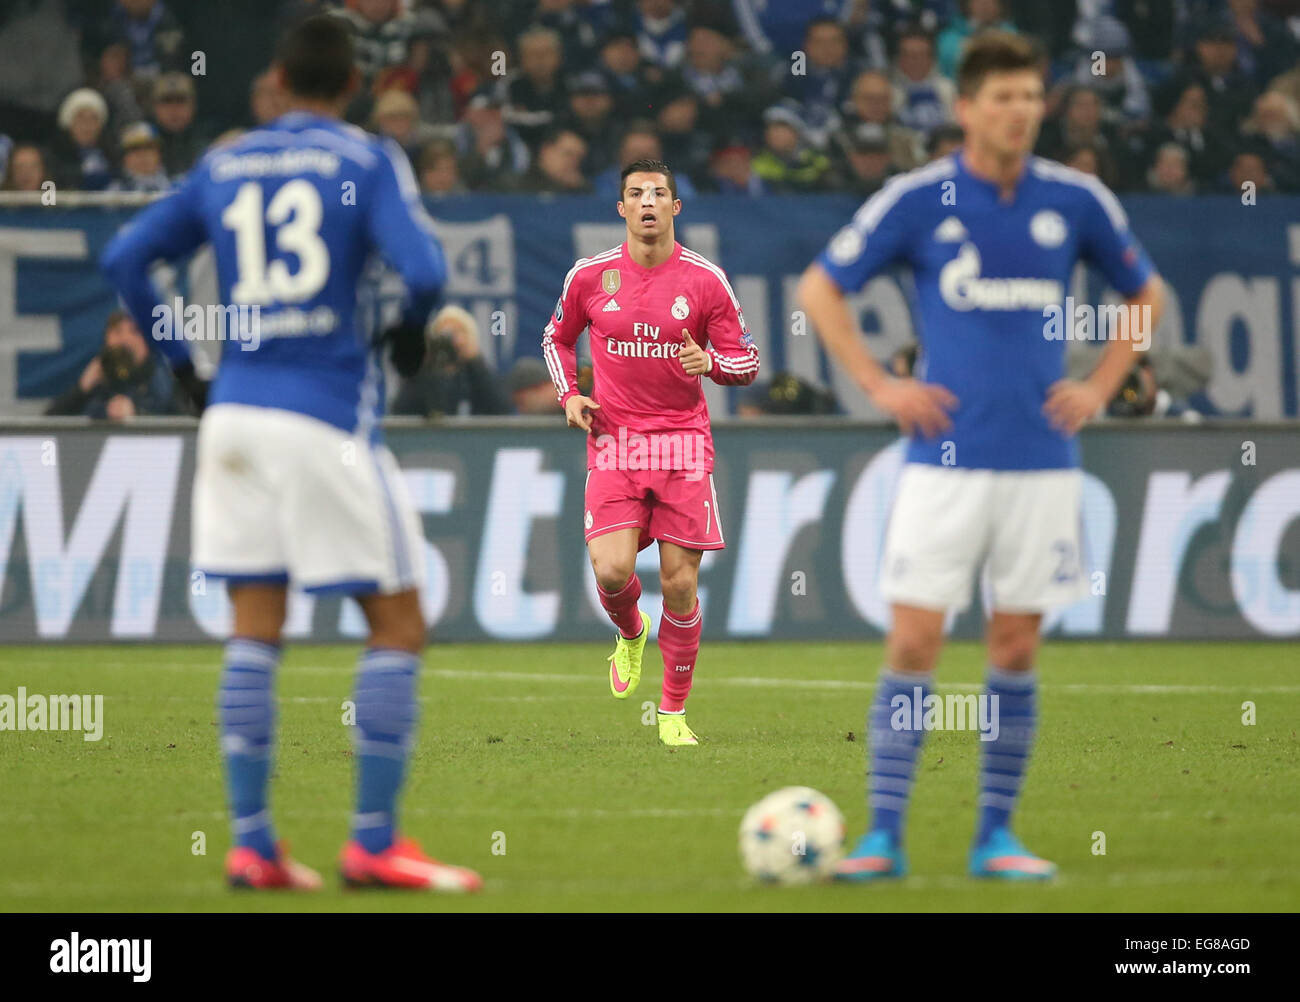 Gelsenkirchen, Germany. 18th Feb, 2015. Cristiano Ronaldo (Real Madrid) celebrates his 1:0 goal against Schalke during the UEFA Champions League Round of 16, first leg soccer match between FC Schalke 04 and Real Madrid in Gelsenkirchen, Germany, 18 February 2015. Schalke's Klaas-Jan Huntelaar (r) and Eric Maxim Choupo-Moting (l)stand in the foreground. Real Madrid won 2-0. Photo: Friso Gentsch/dpa/Alamy Live News Stock Photo